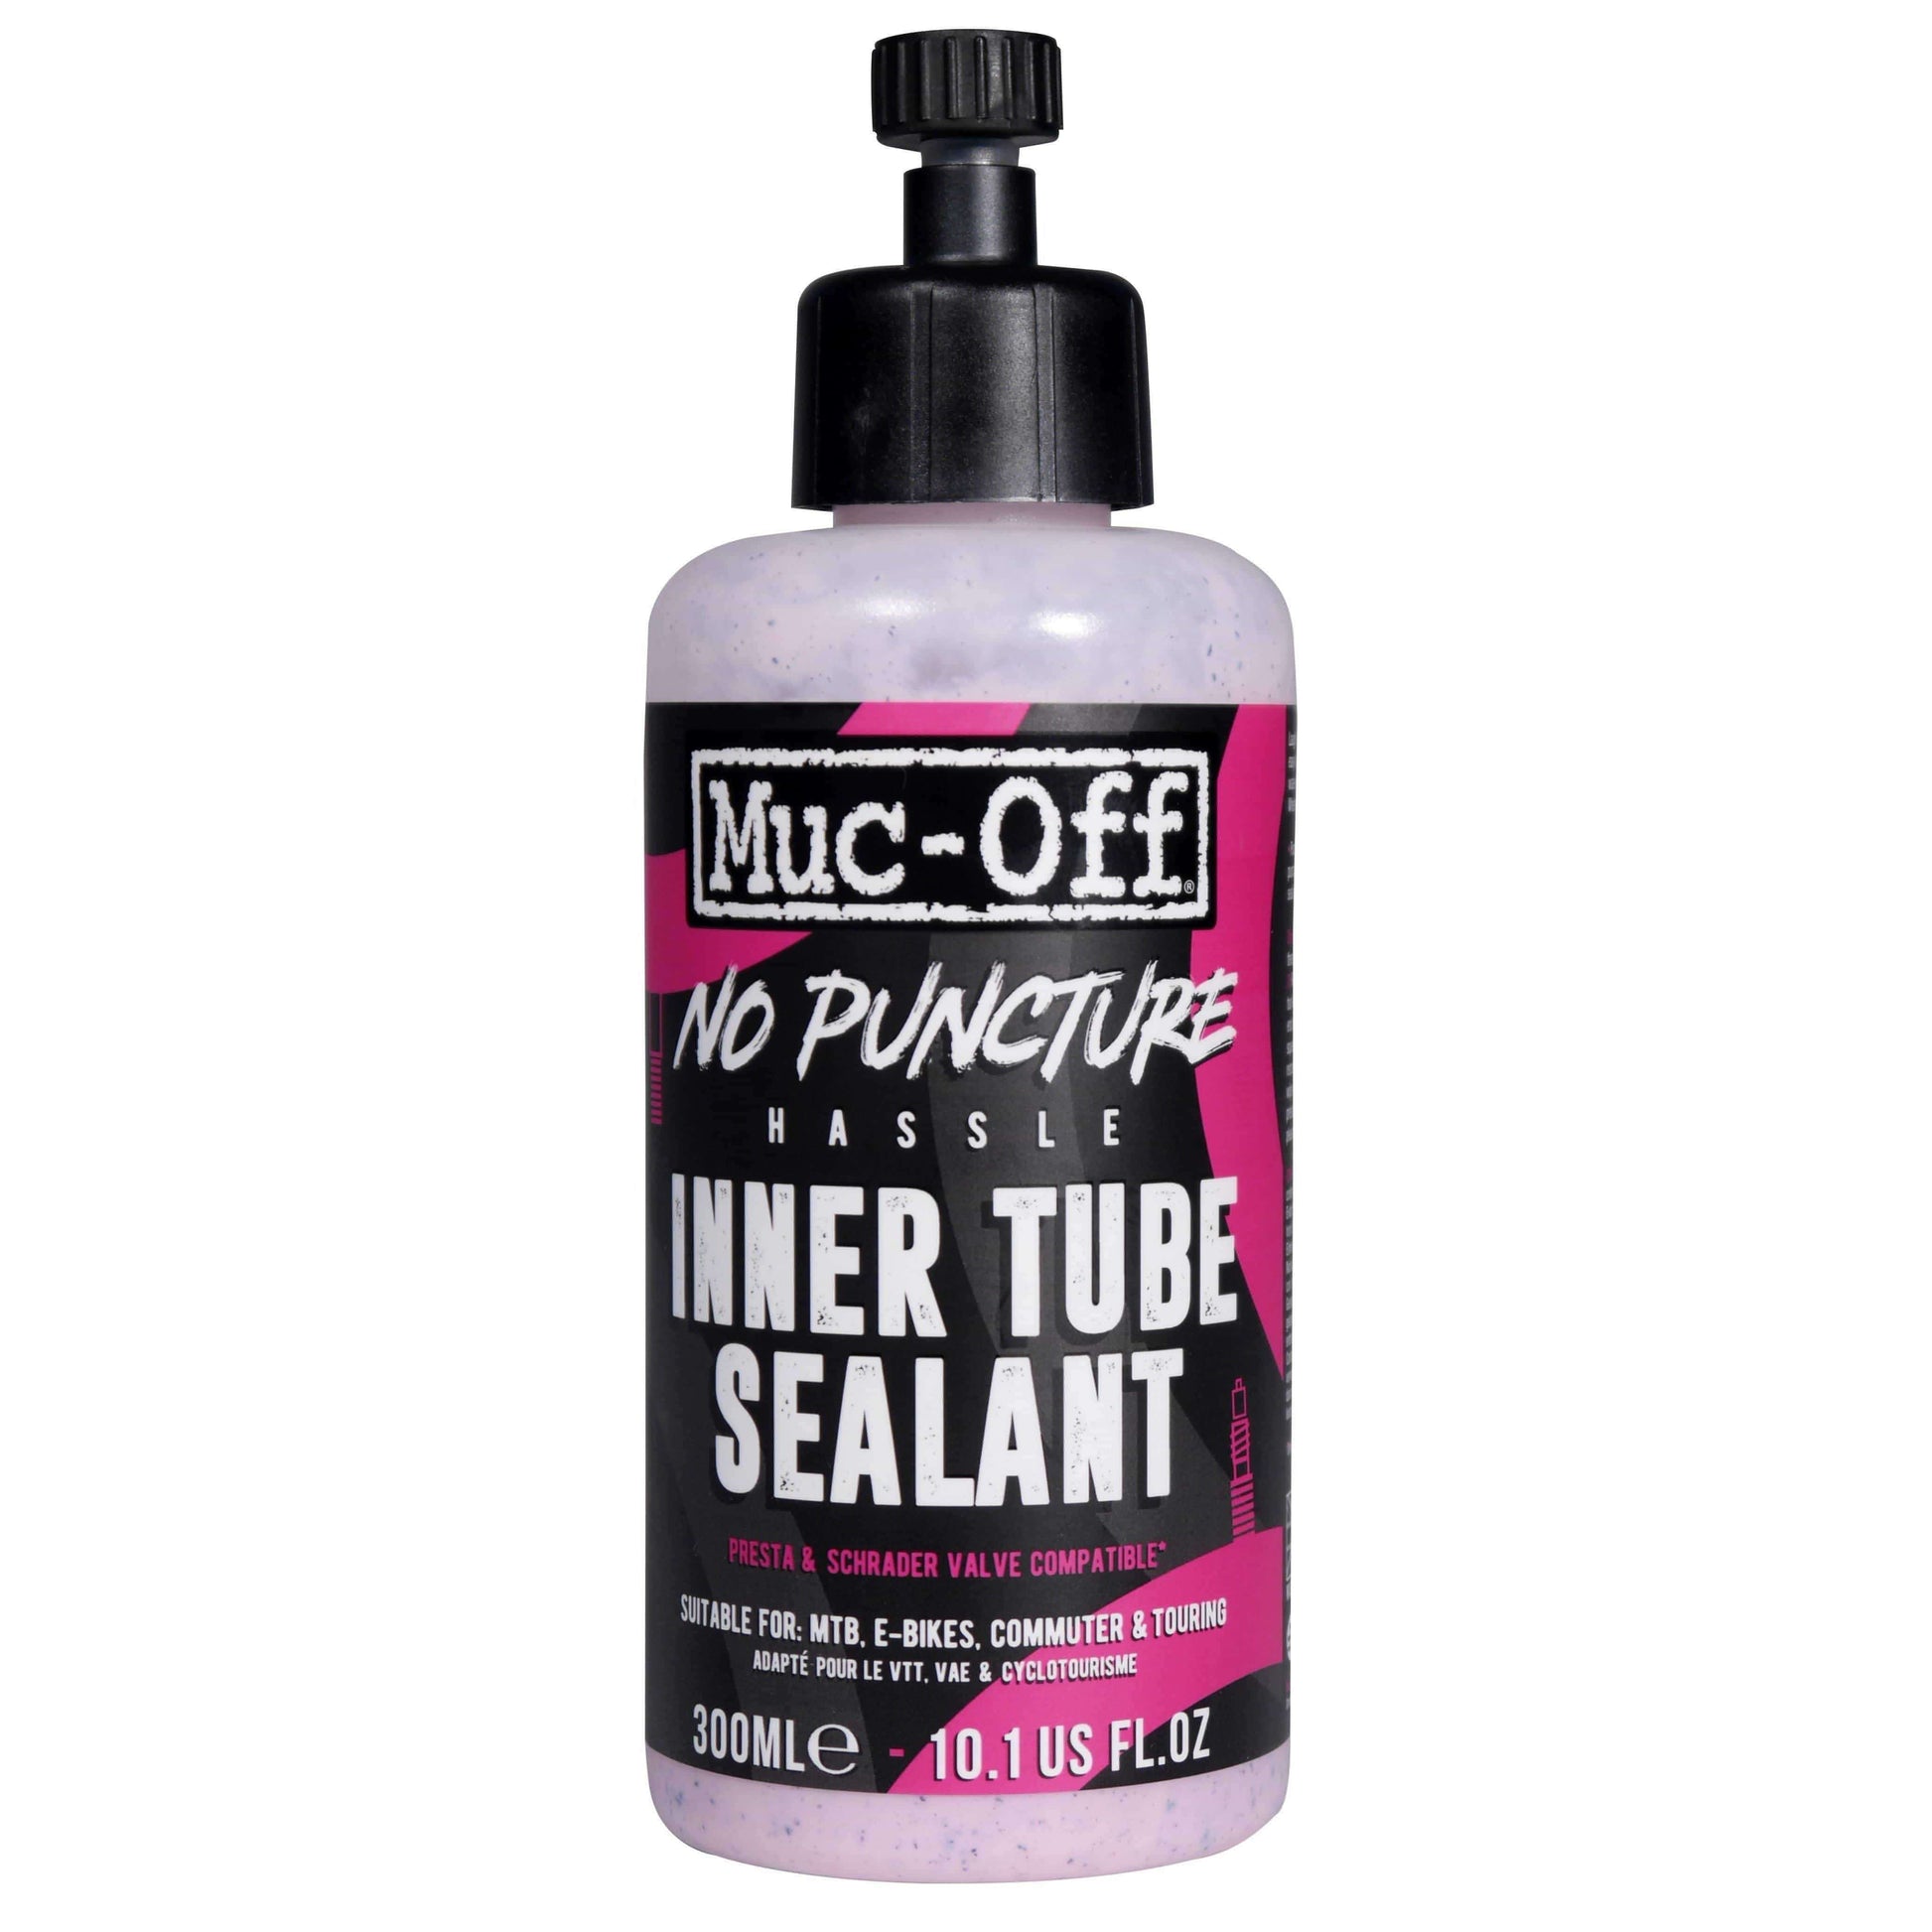 Muc-Off No Puncture Hassle Inner Tube Sealant 300ml - Pink 5037835206746 - Start Fitness